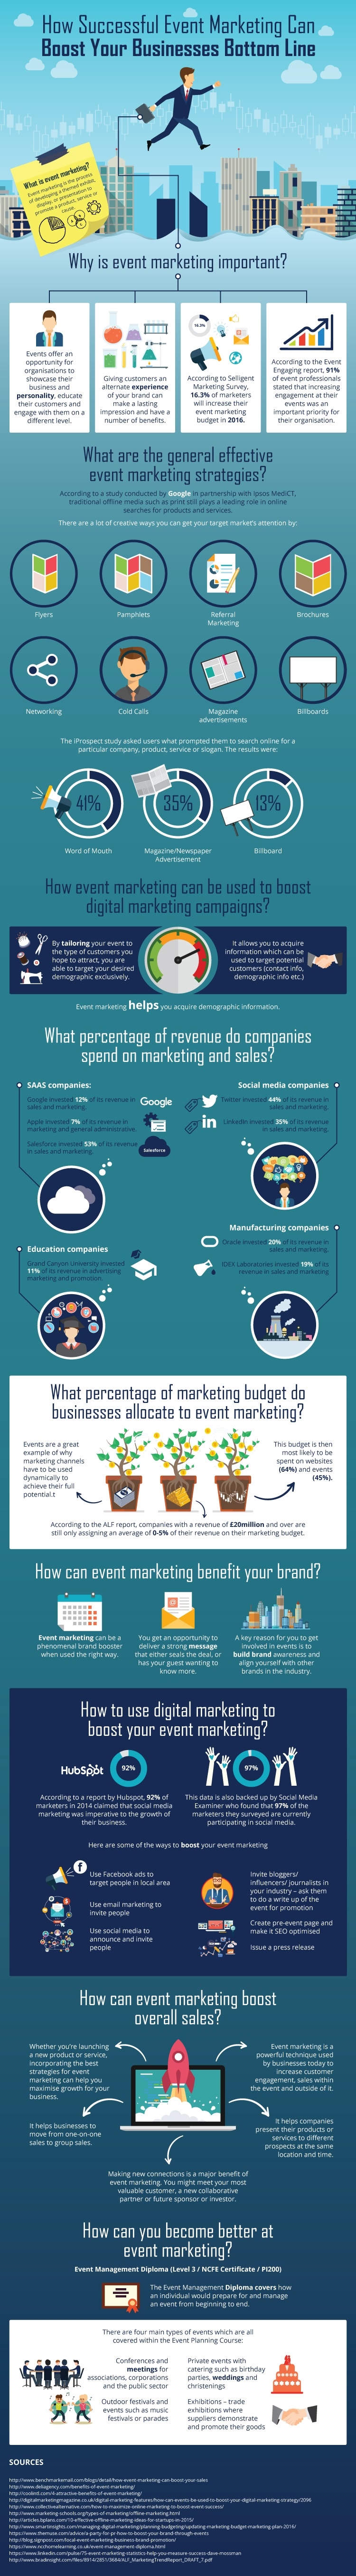 How Outstanding Event Marketing Boosts Brand Awareness [Infographic]